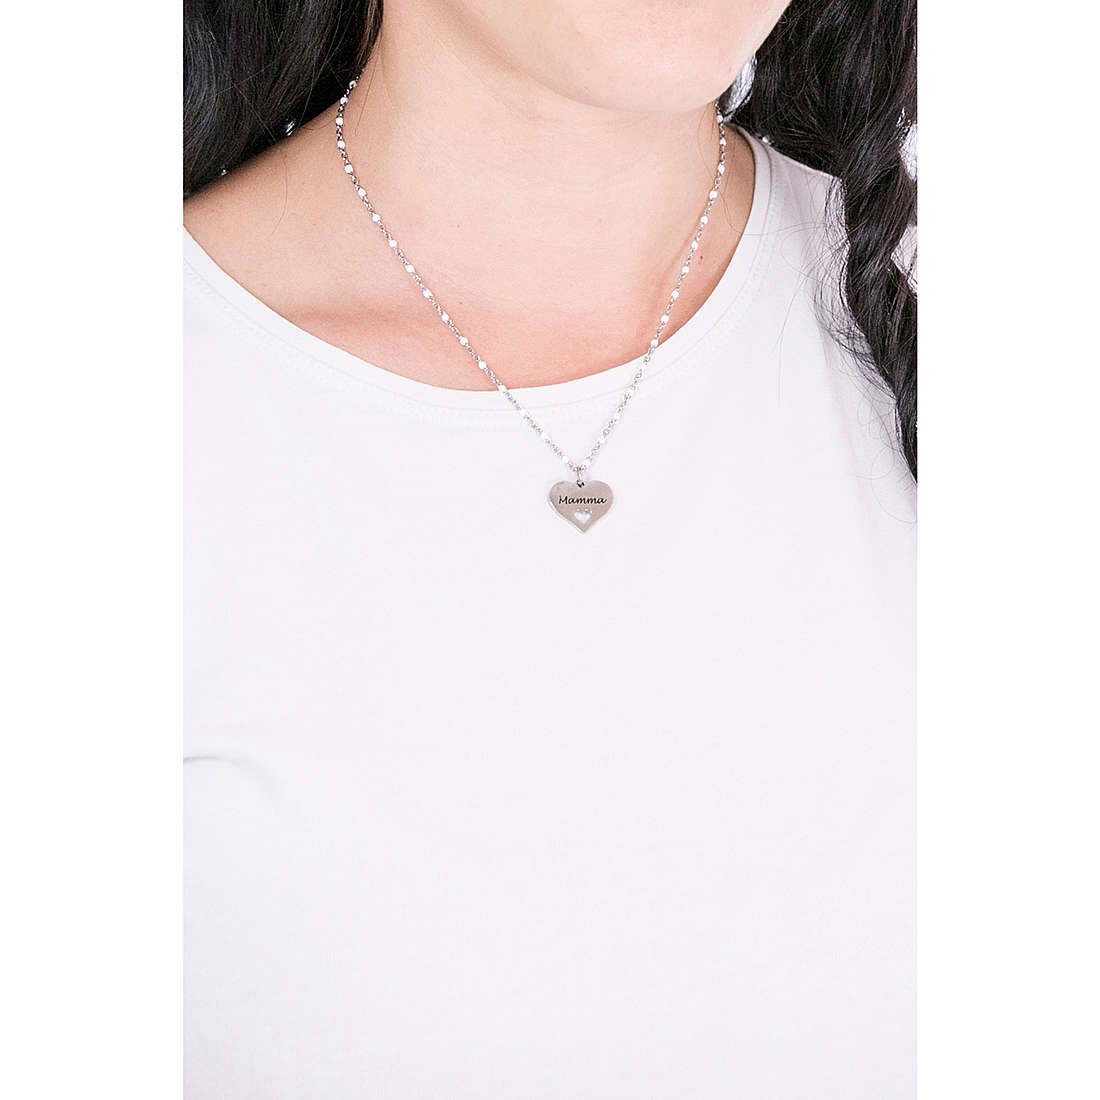 Kidult necklaces Family woman 751158 wearing